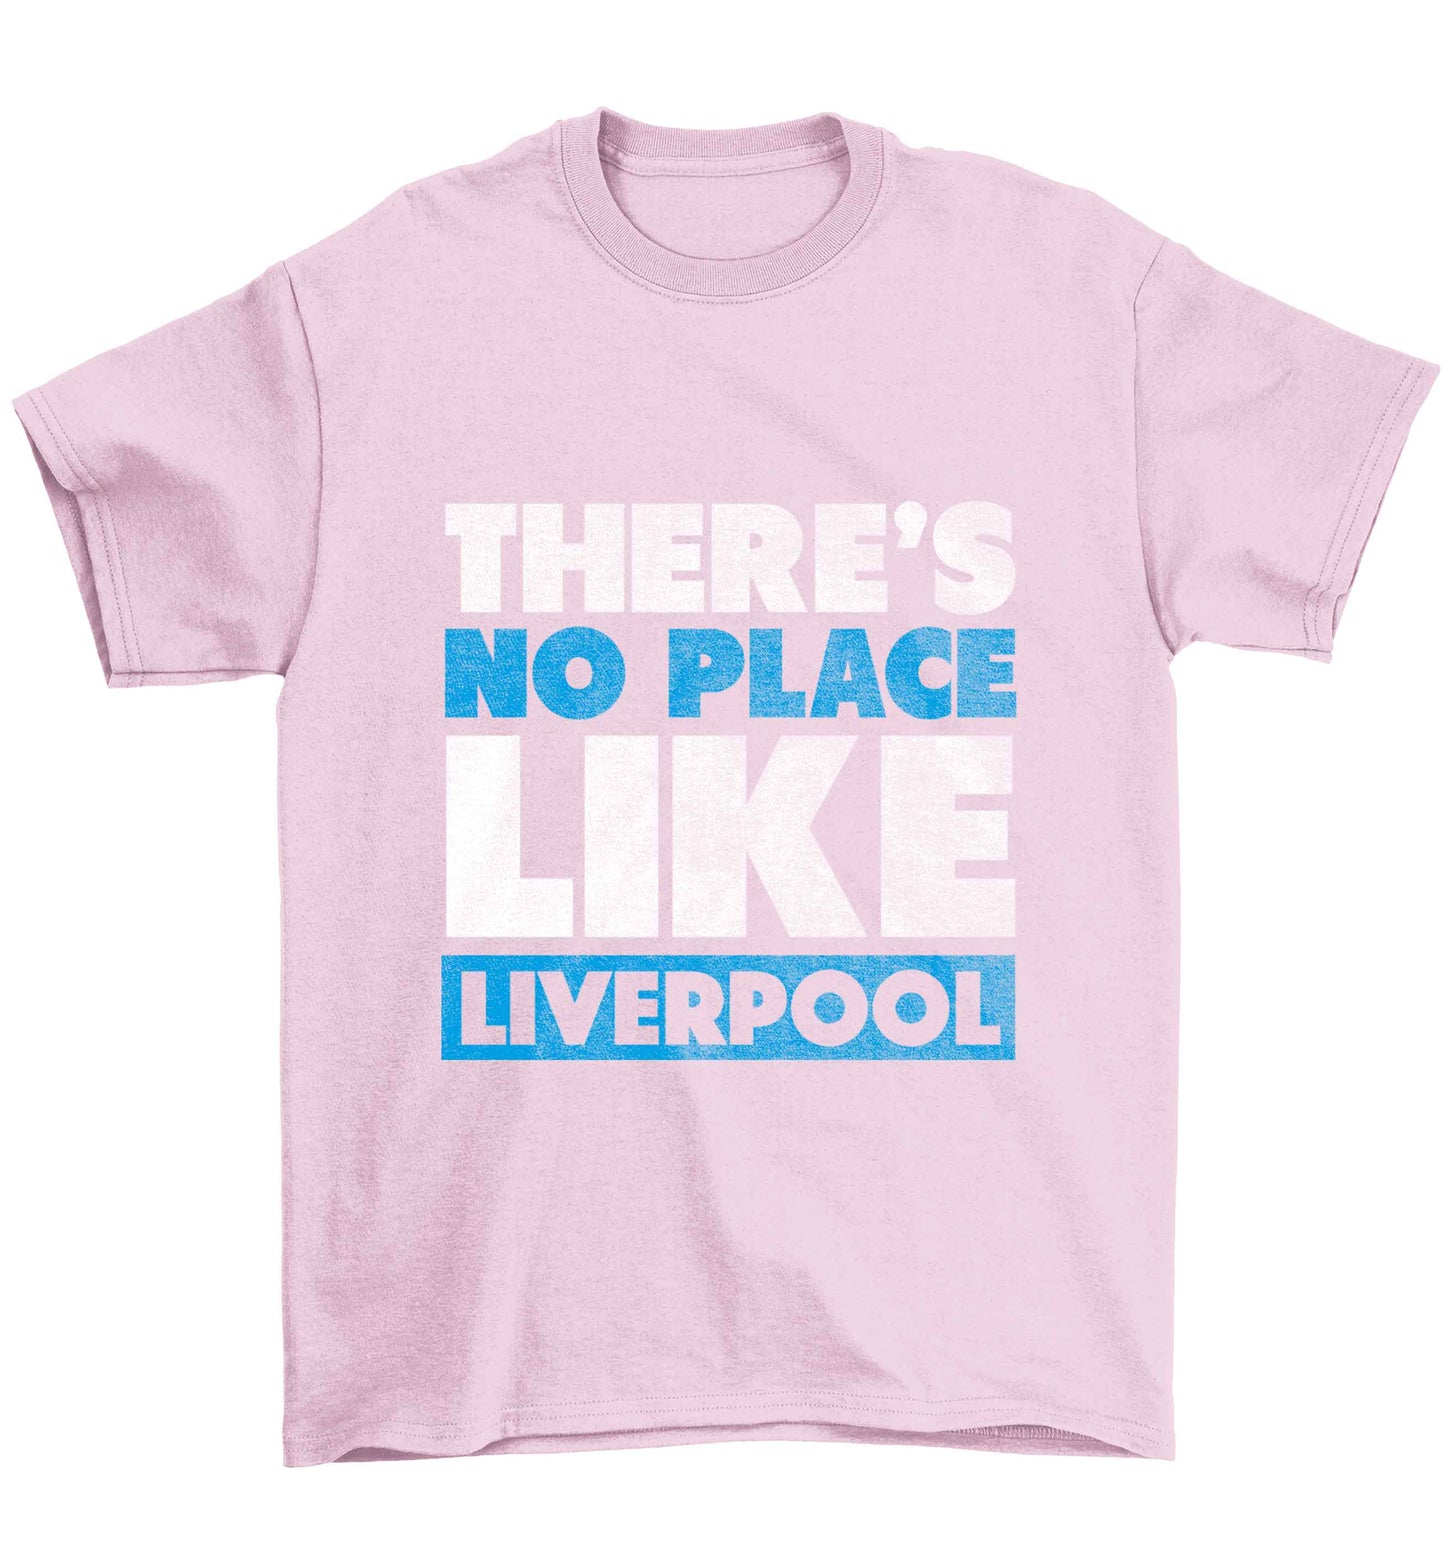 There's no place like Liverpool Children's light pink Tshirt 12-13 Years